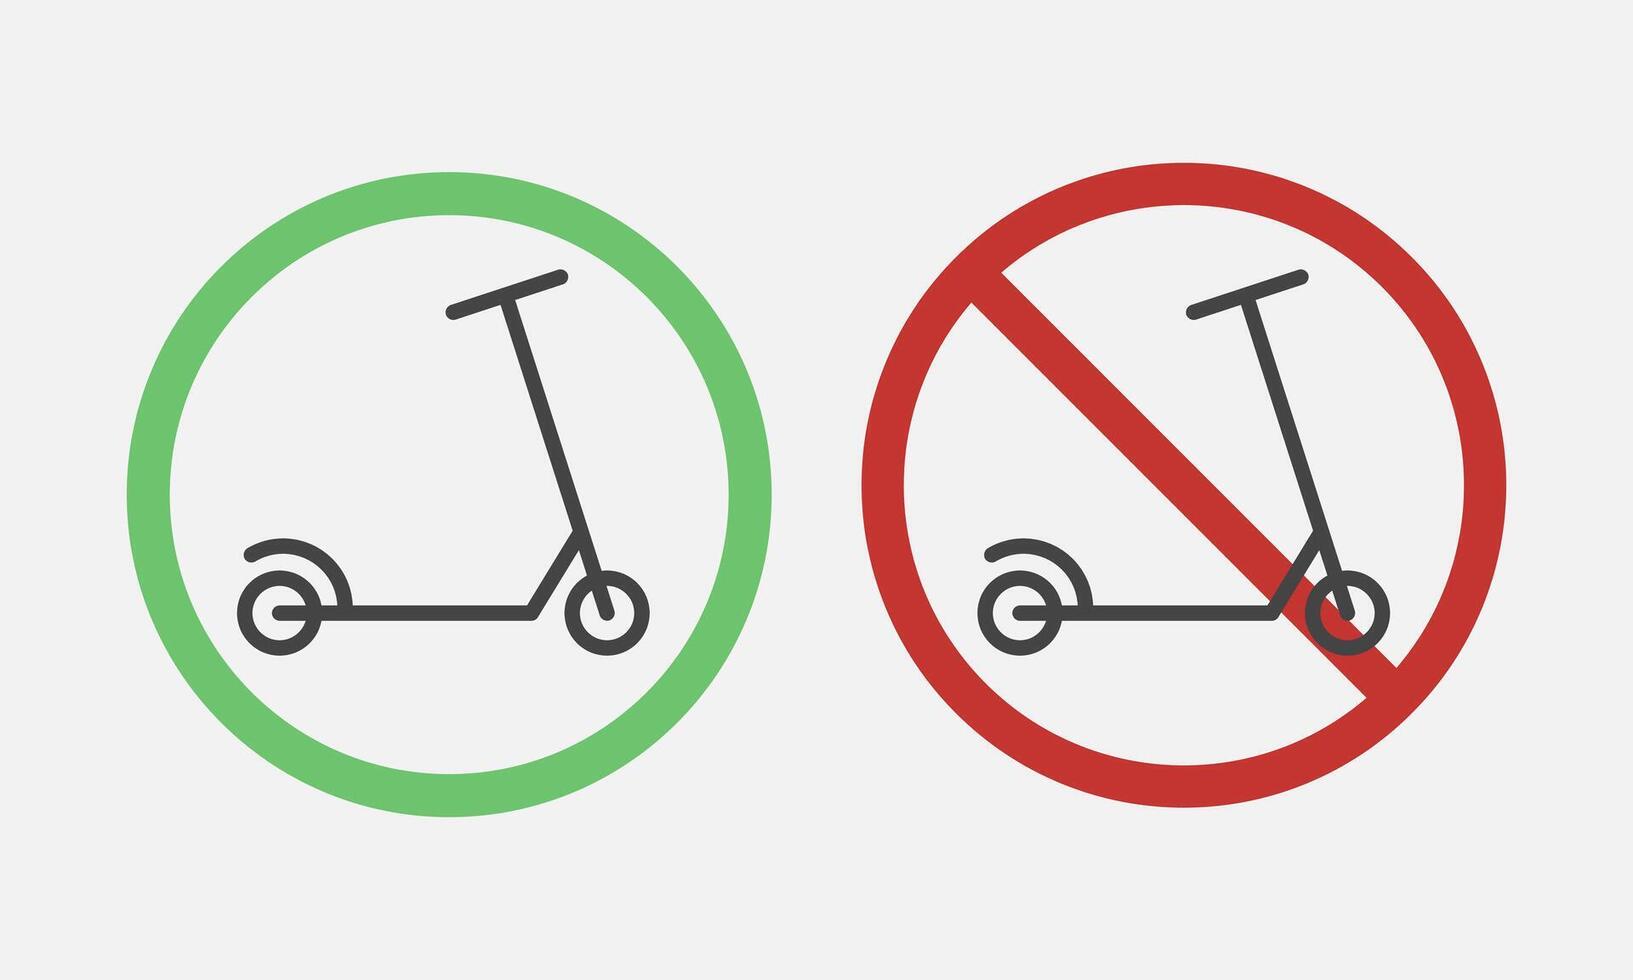 Scooter informational signs. No ride scooters. Forbidden, unallowed transport symbol. Vector illustration